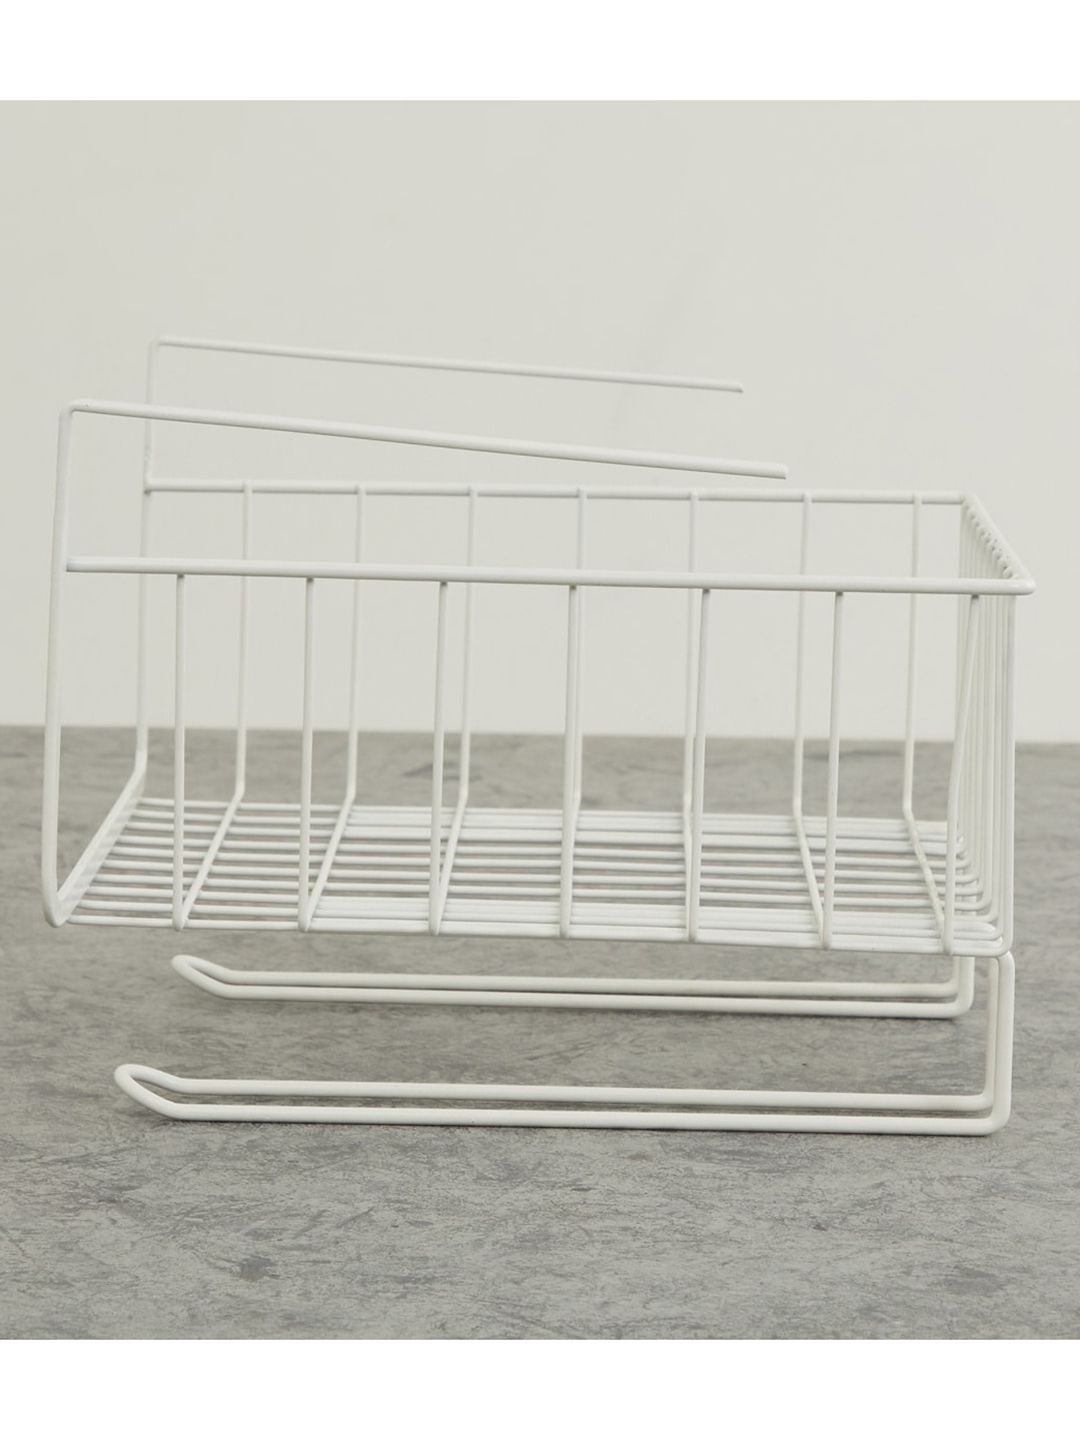 Home Centre Off White Solid Metal Over The Shelf Utensil Holder Basket Price in India